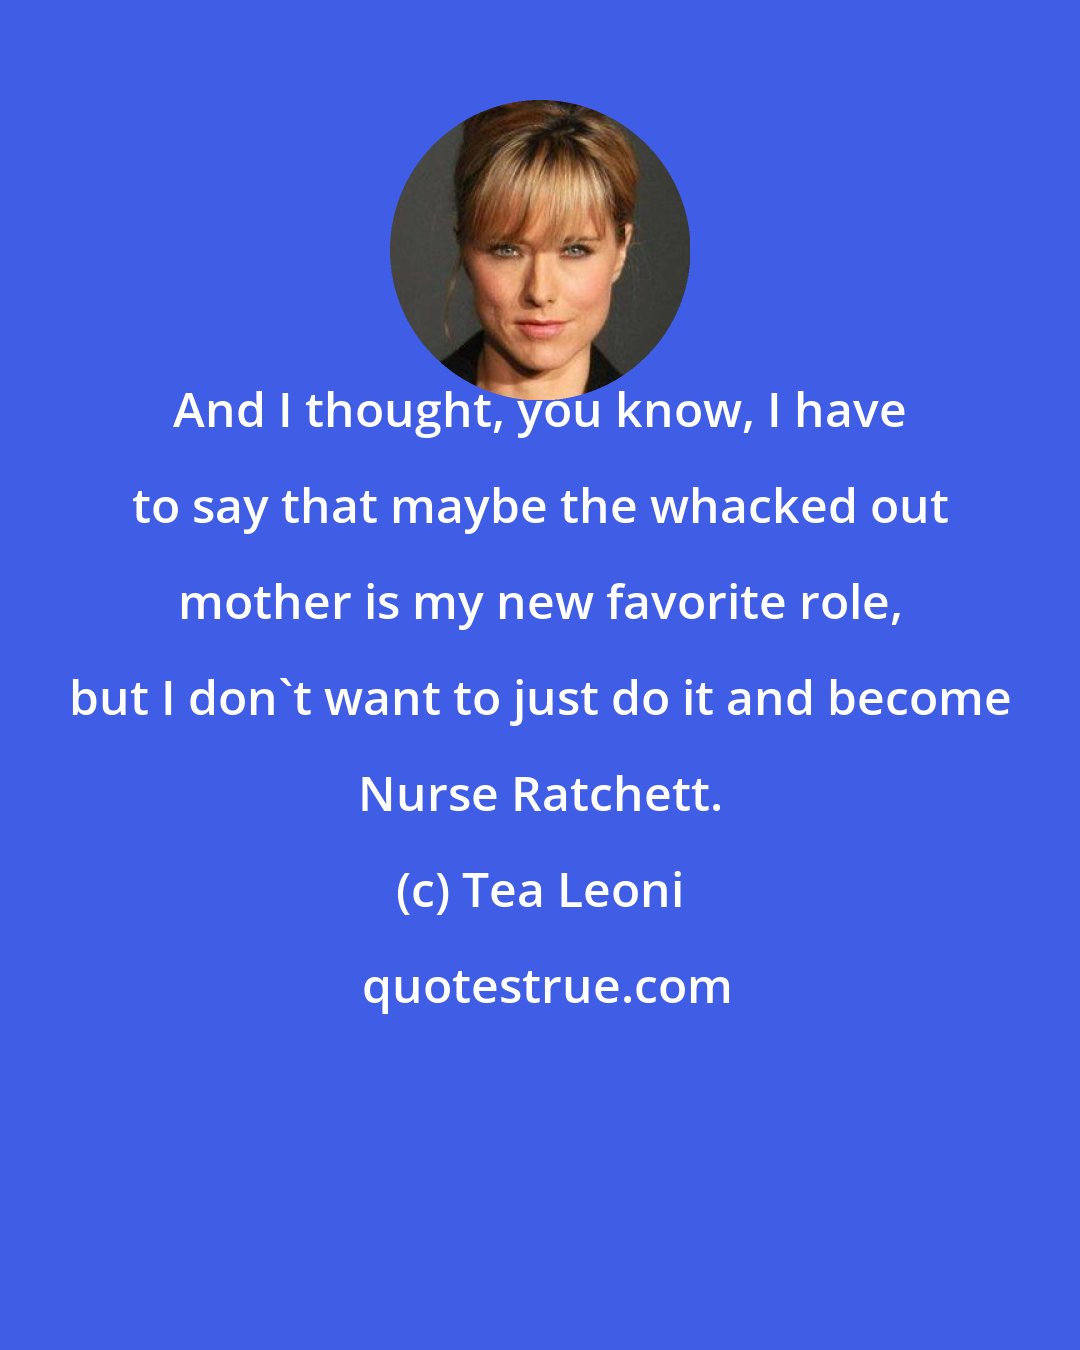 Tea Leoni: And I thought, you know, I have to say that maybe the whacked out mother is my new favorite role, but I don't want to just do it and become Nurse Ratchett.